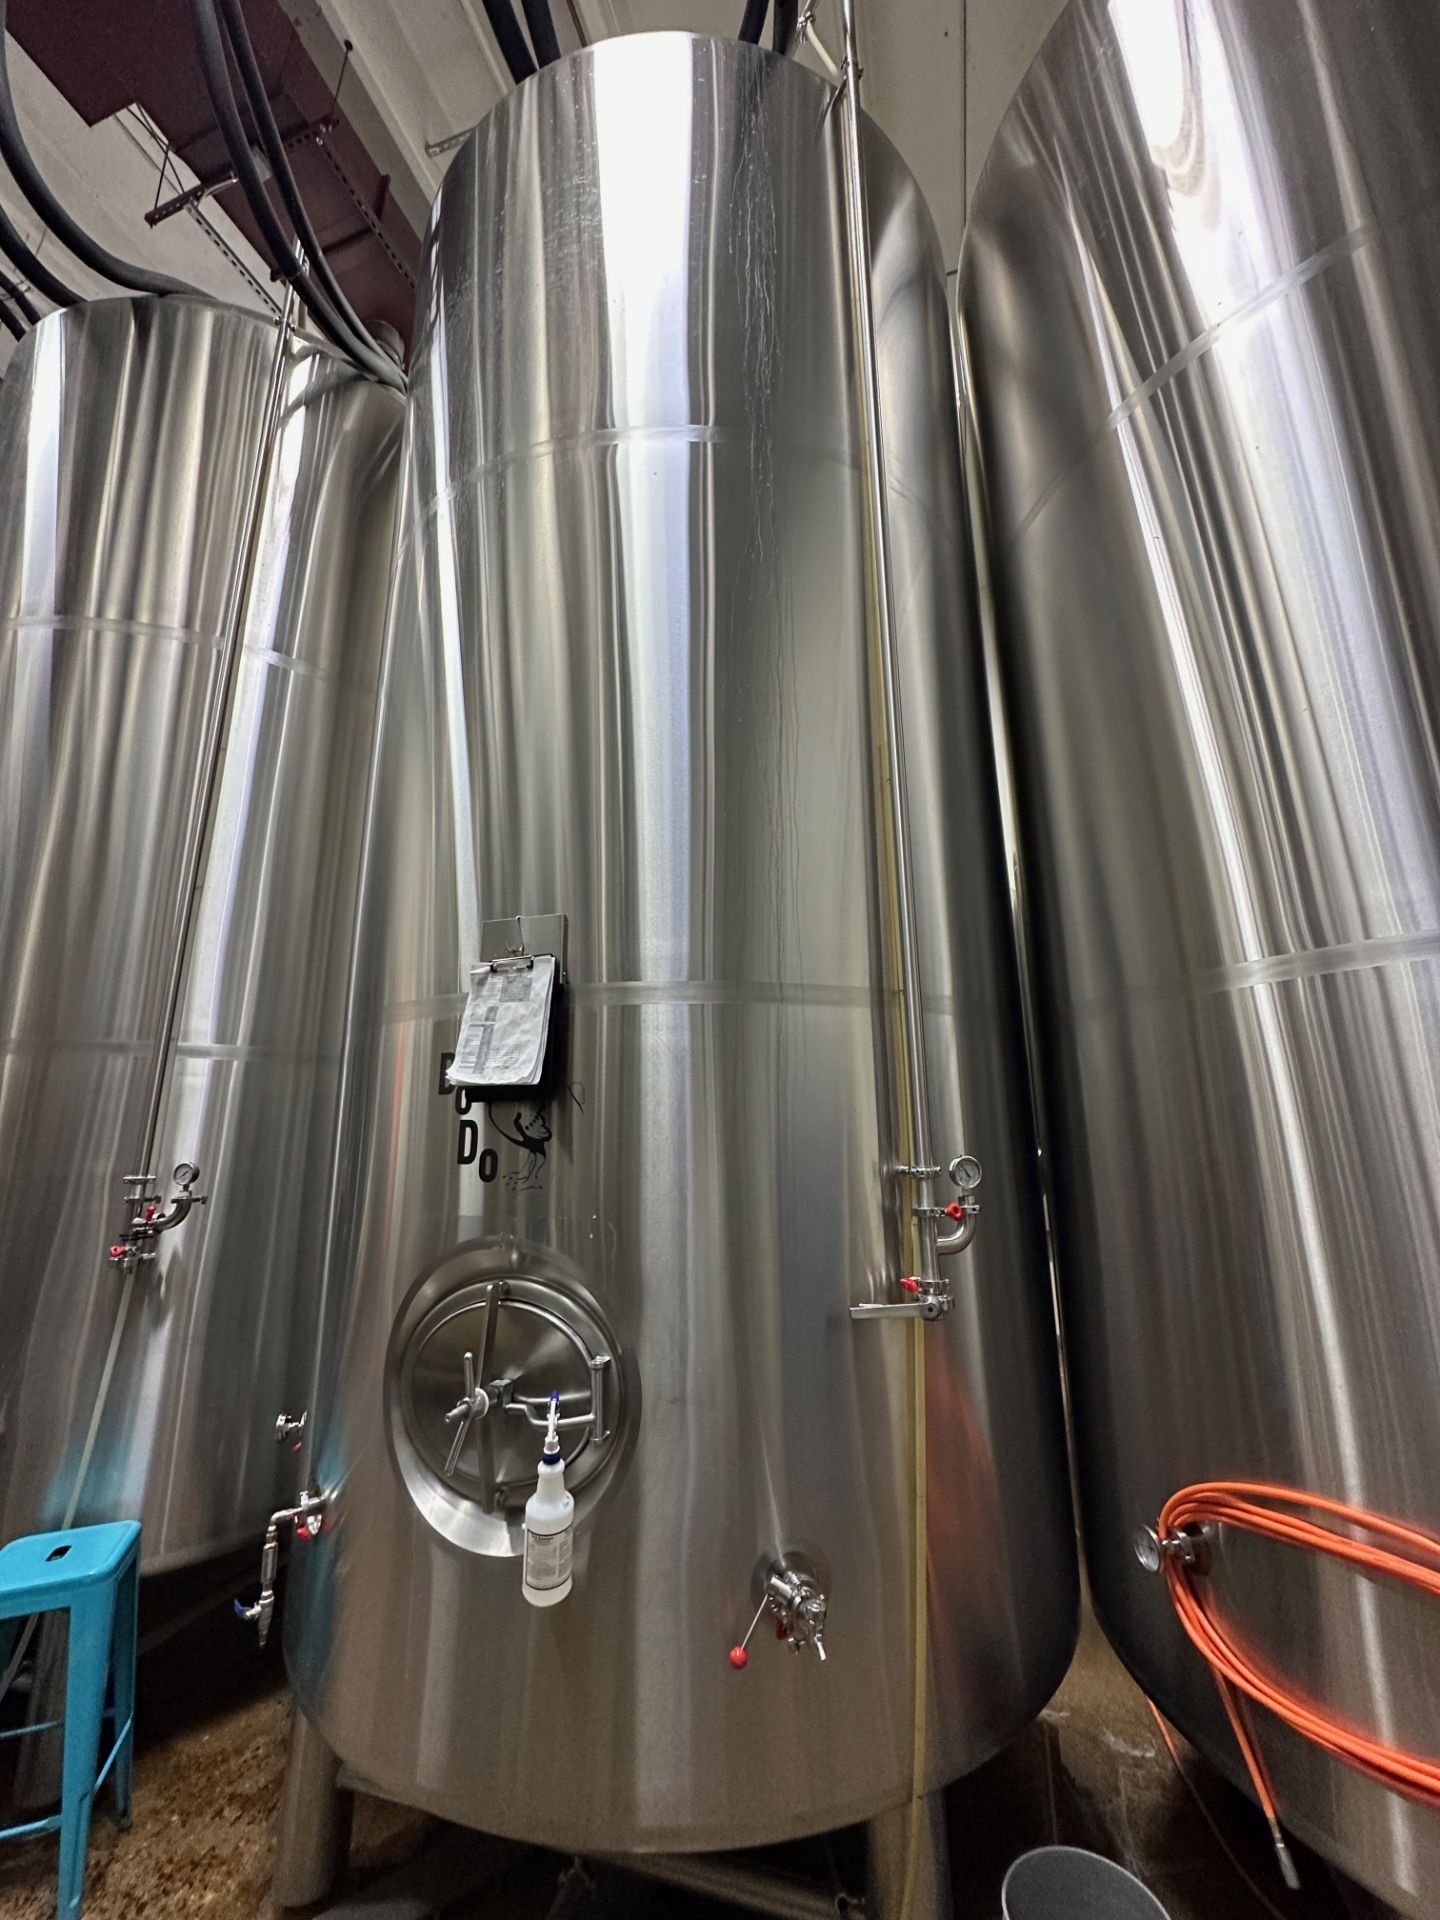 2018 ABS 120 BBL Stainless Steel Brite Tank - Dish Bottom, Glycol Jackete | Rig Fee $2150 w/ Saddles